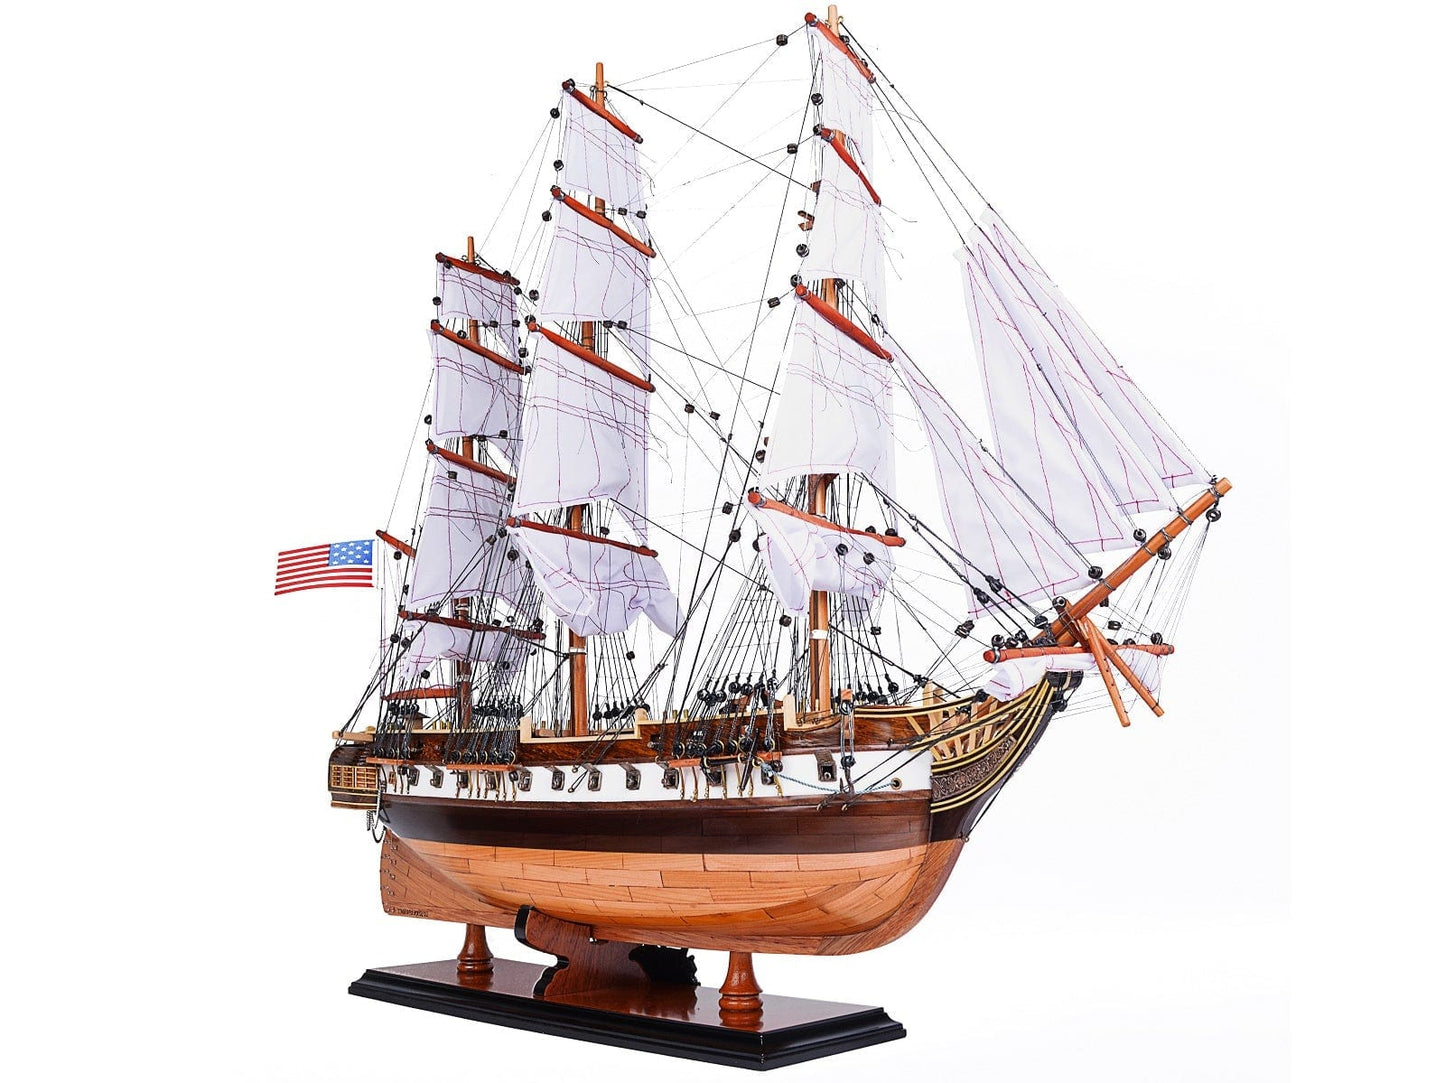 ALDO Hobbies & Creative Arts> Collectibles> Scale Model L: 29 W: 9.25 H: 26 Inches / NEW / Wood U.S.S. Constellation United States Navy Tall War Ship Medium Exclusive Edition Wood Model Sailboat Assembled